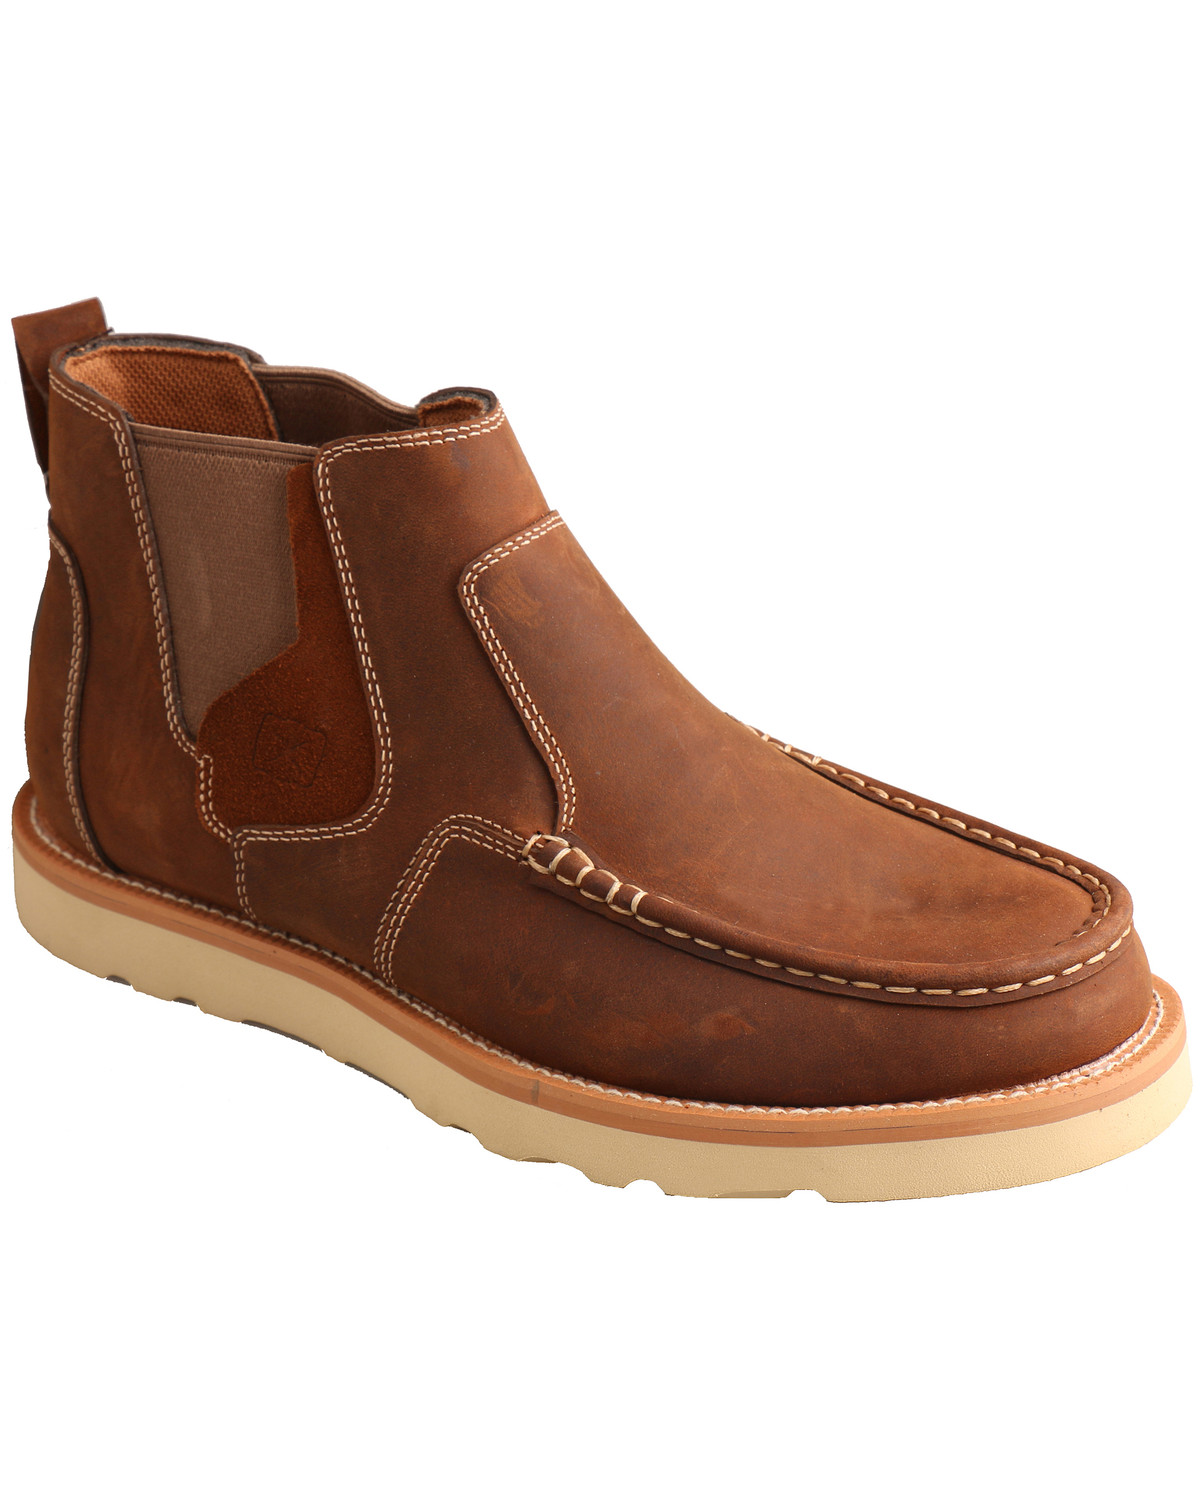 brown casual boots